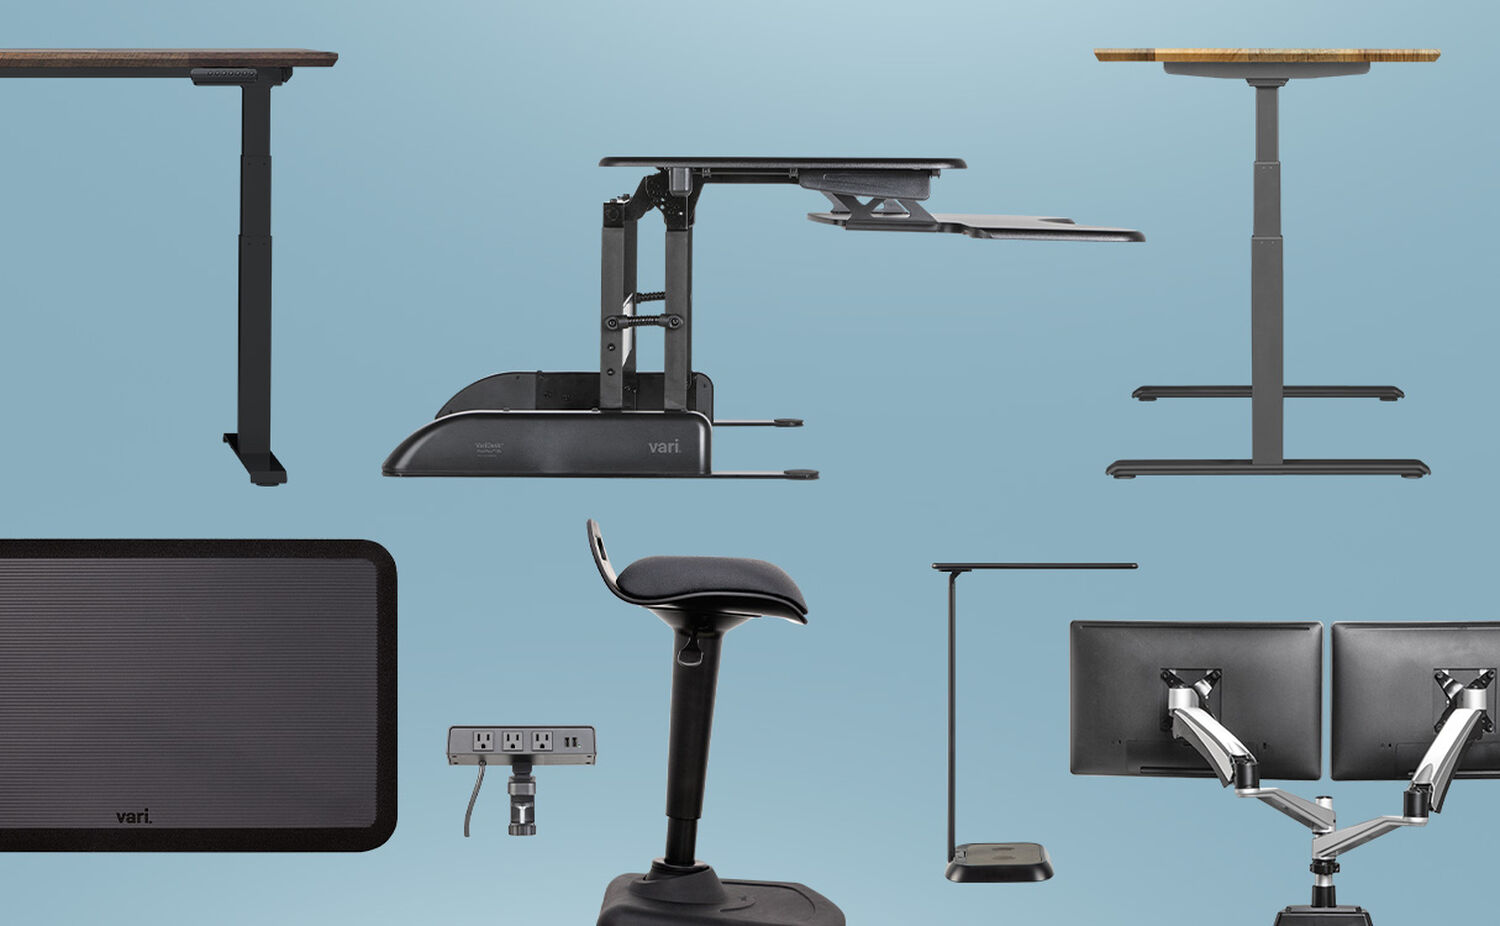 various vari desks and accessories shown on a blue background